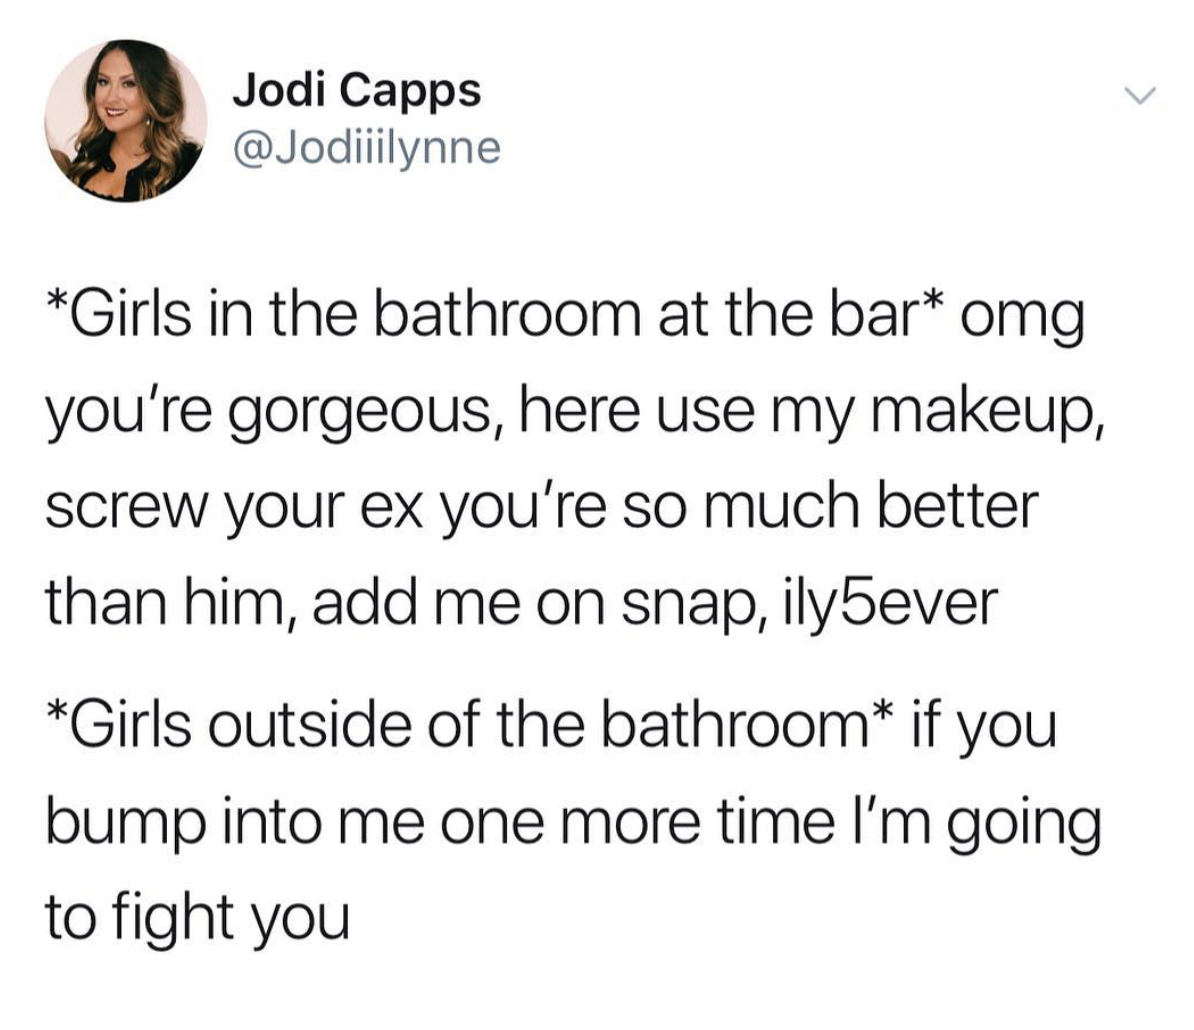 funny scottish tweets - Jodic Jodi Capps Girls in the bathroom at the bar omg you're gorgeous, here use my makeup, screw your ex you're so much better than him, add me on snap, ily5ever Girls outside of the bathroom if you bump into me one more time I'm g